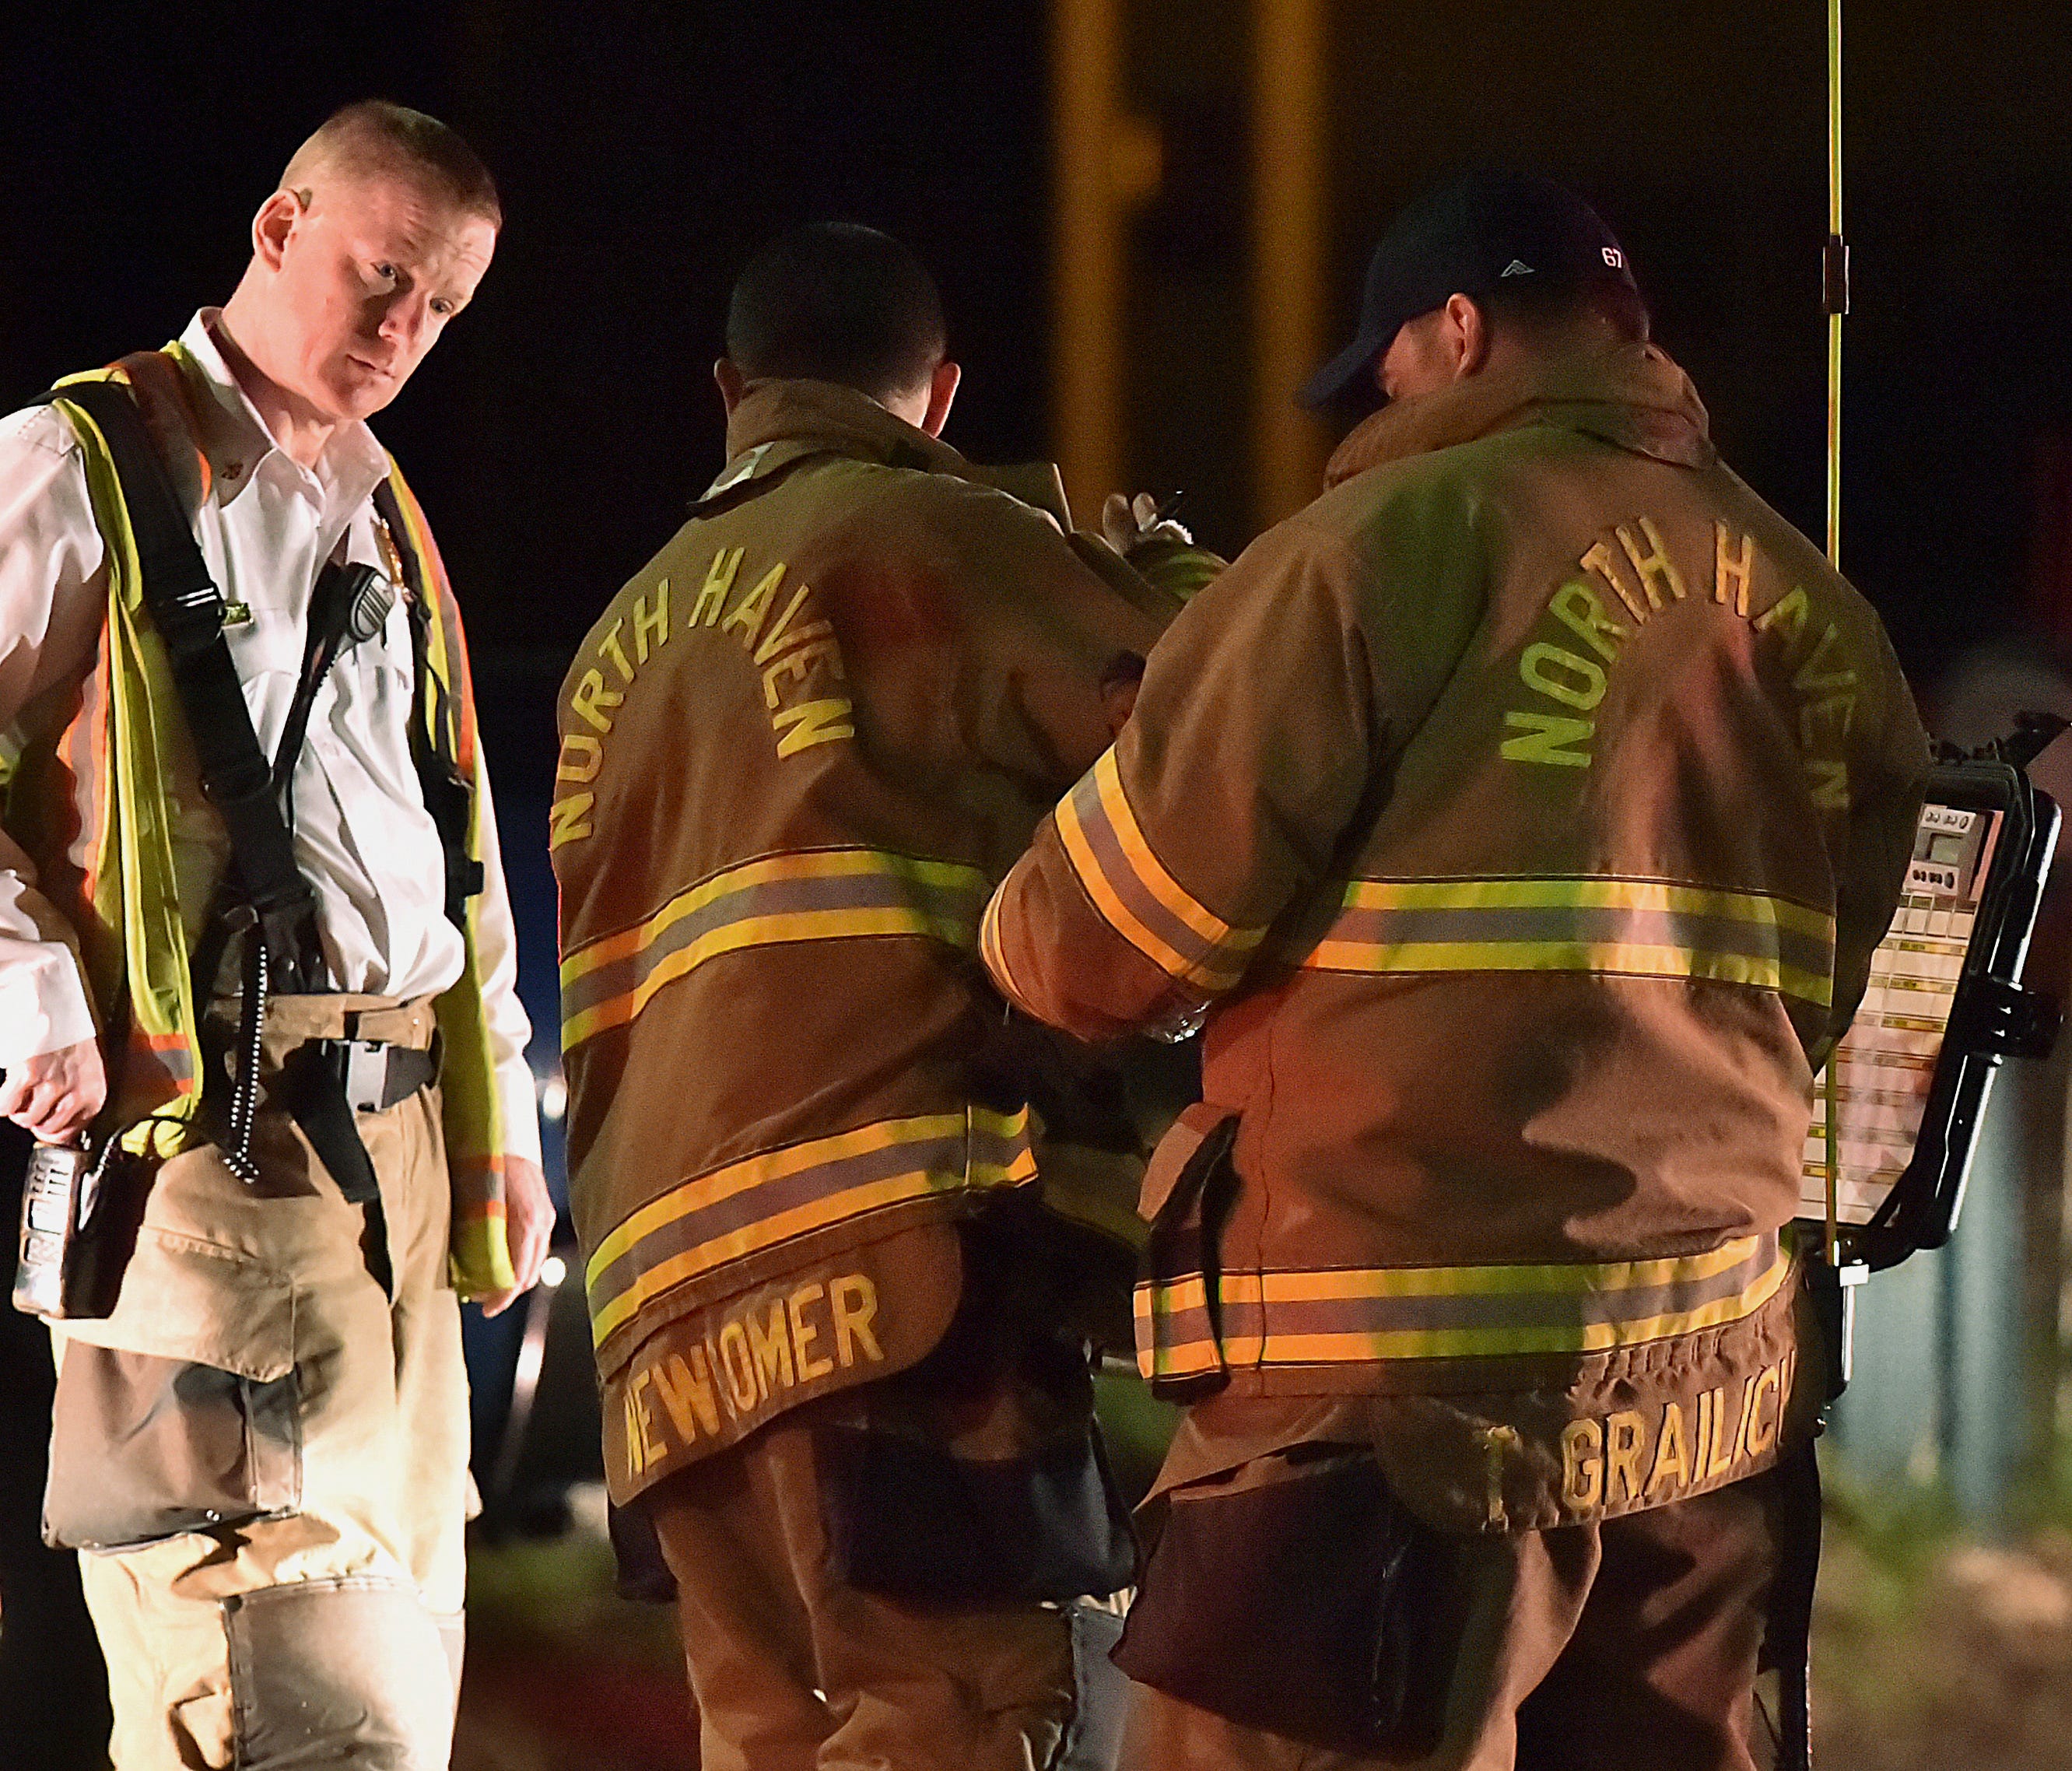 Emergency personnel respond in North Haven, Conn., at the scene of an explosion Wednesday.